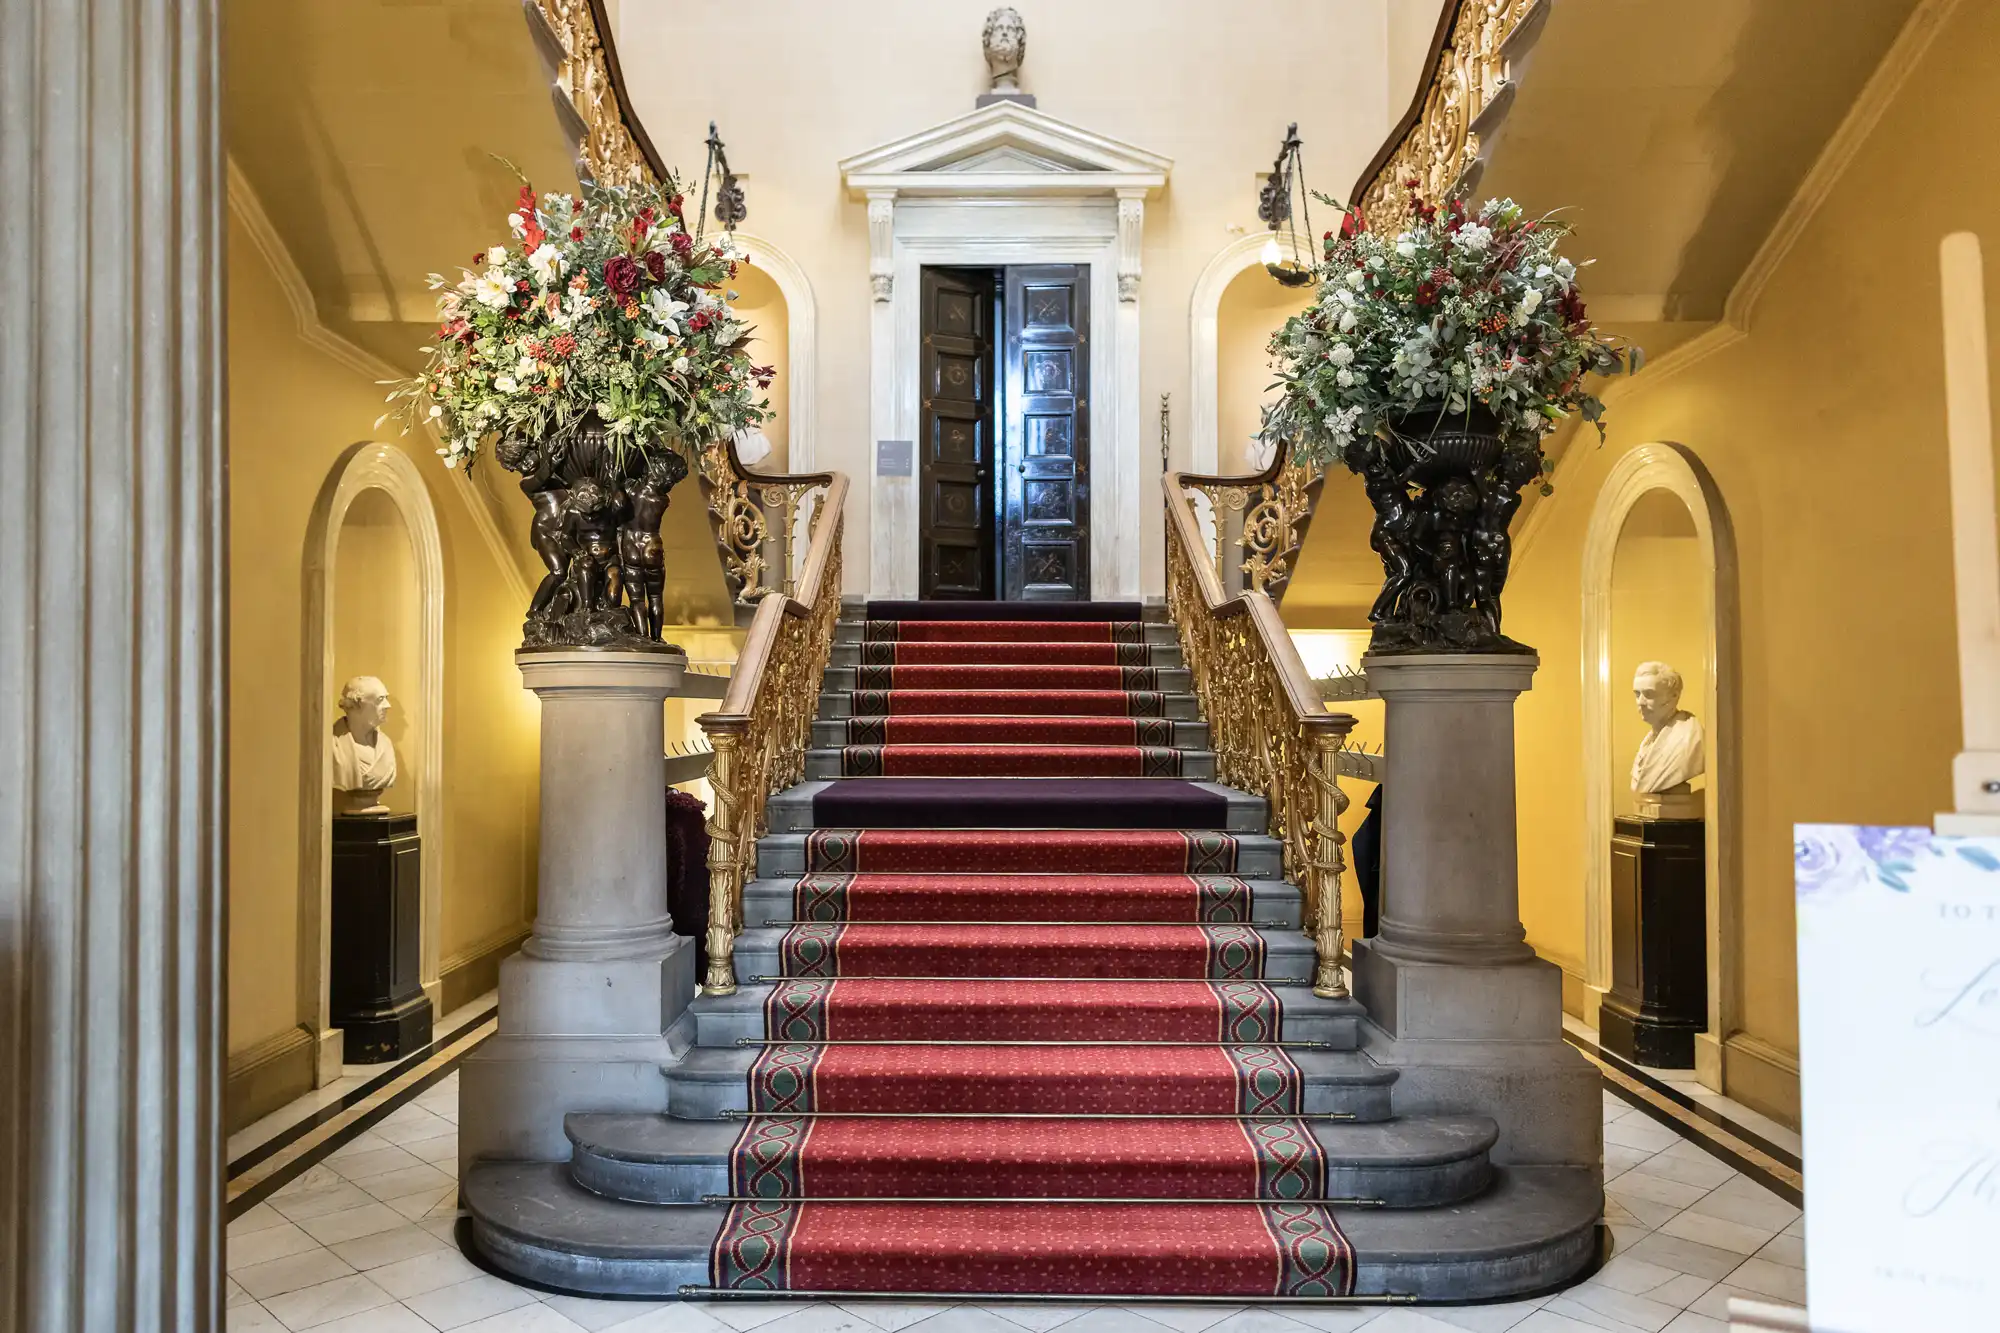 A grand staircase with red carpet, ornate banisters, and floral arrangements on each side. Bust sculptures are displayed in niches along the walls, under high ceilings with elegant decor.